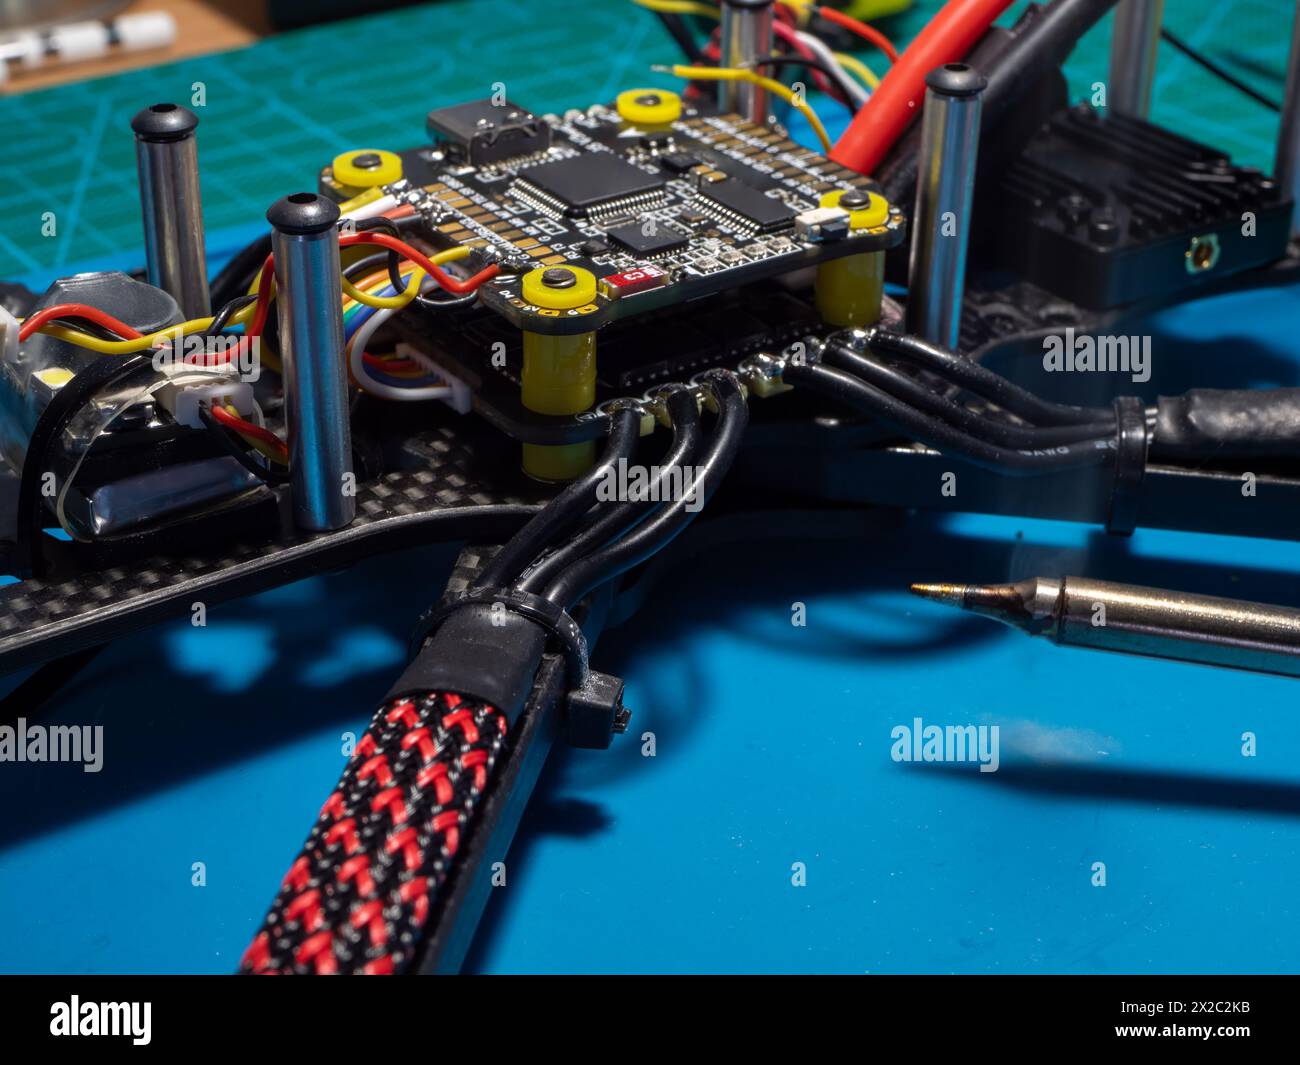 Close-up of the FPV drone assembly. Hobbies and UAV engineering. Stock Photo